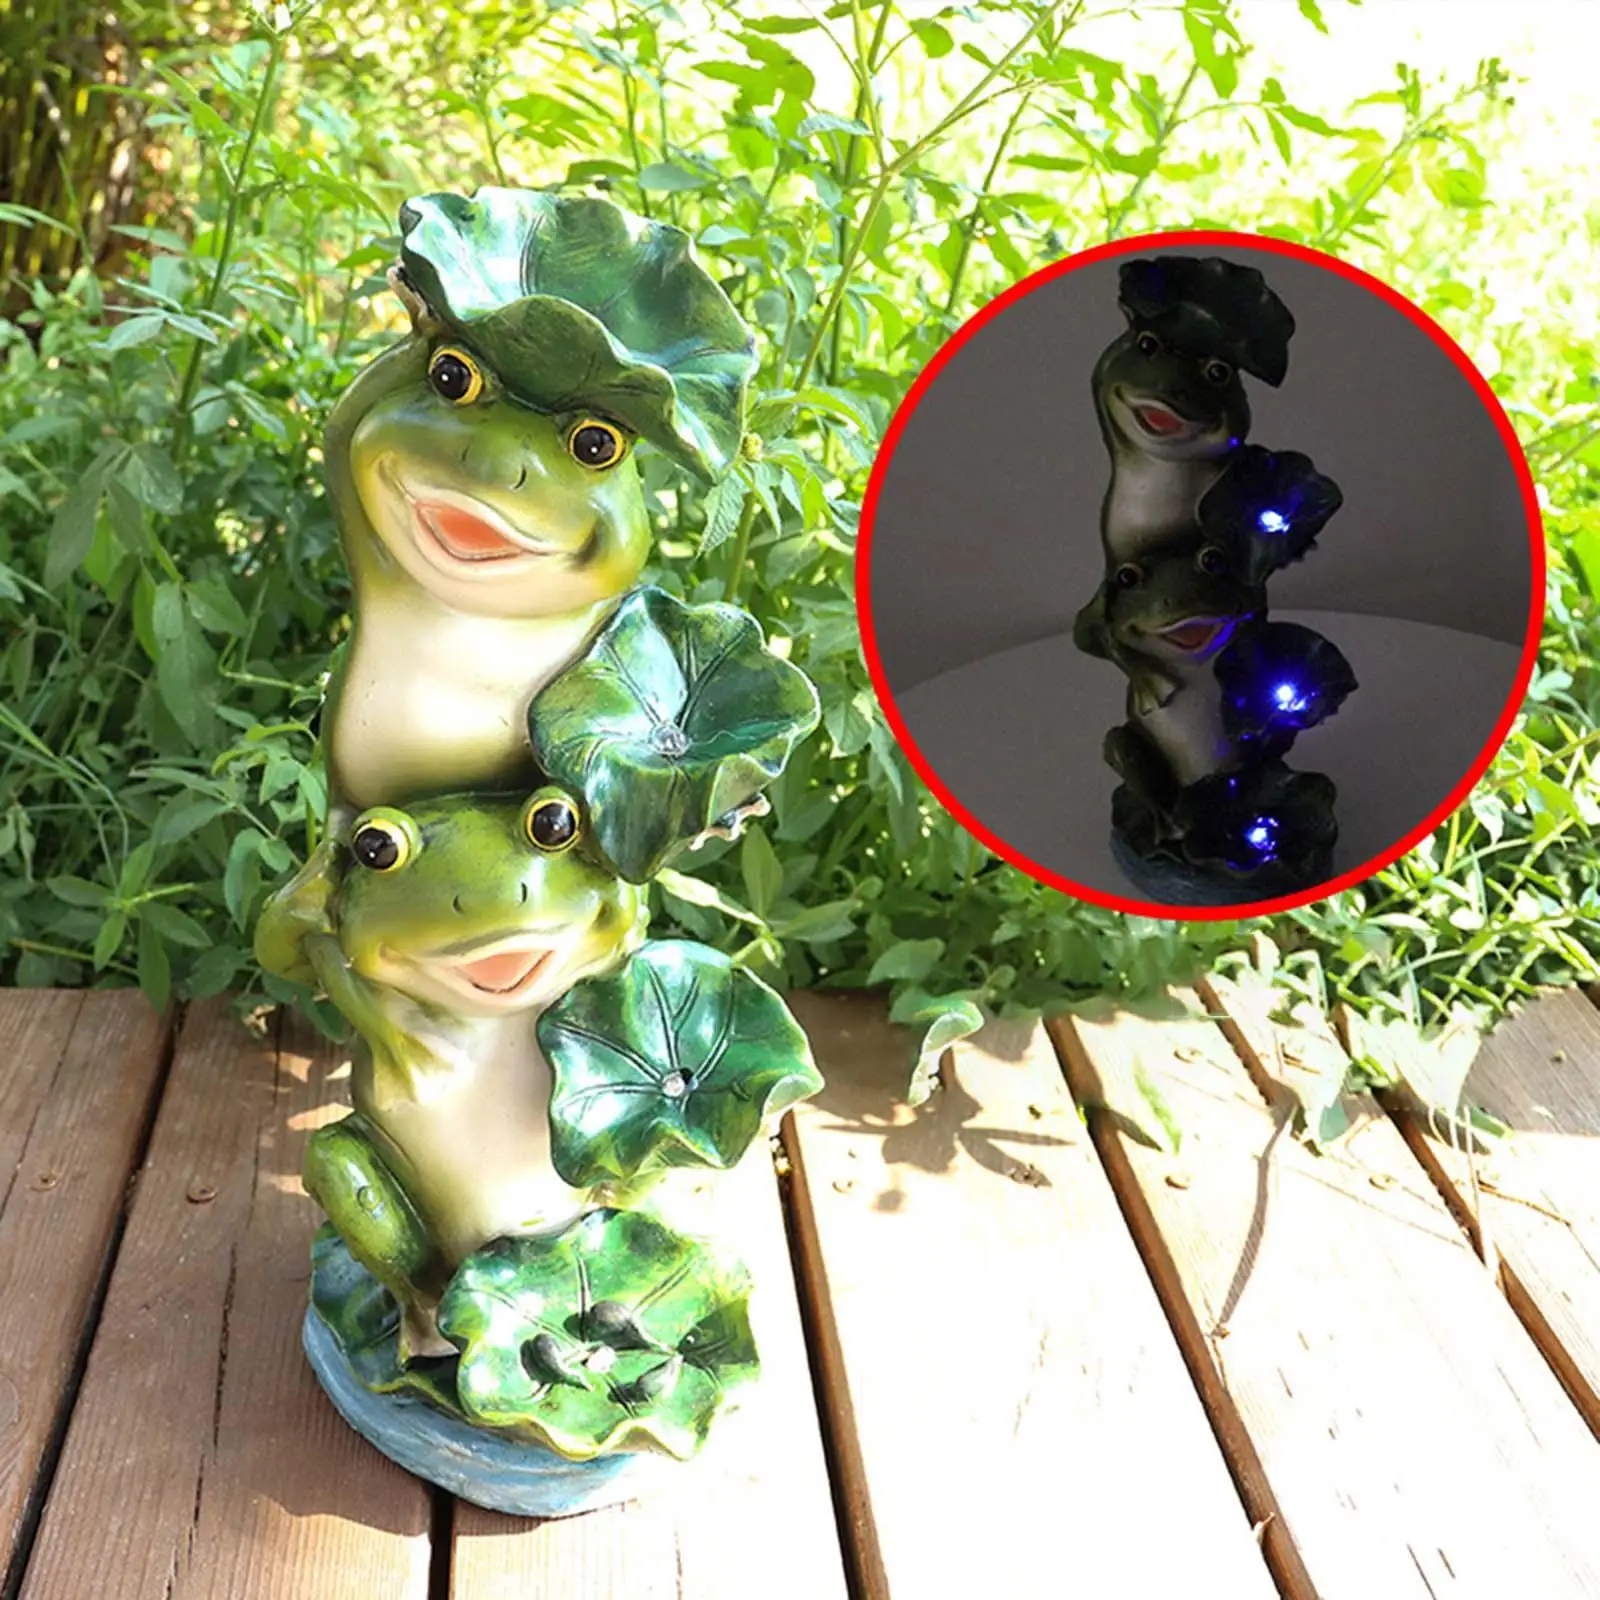 Outdoor Solar Powered Garden Lantern Garden Ornament Frog Figure Frogs Statue with Light for Lawn Yard Pathway Patio Decor